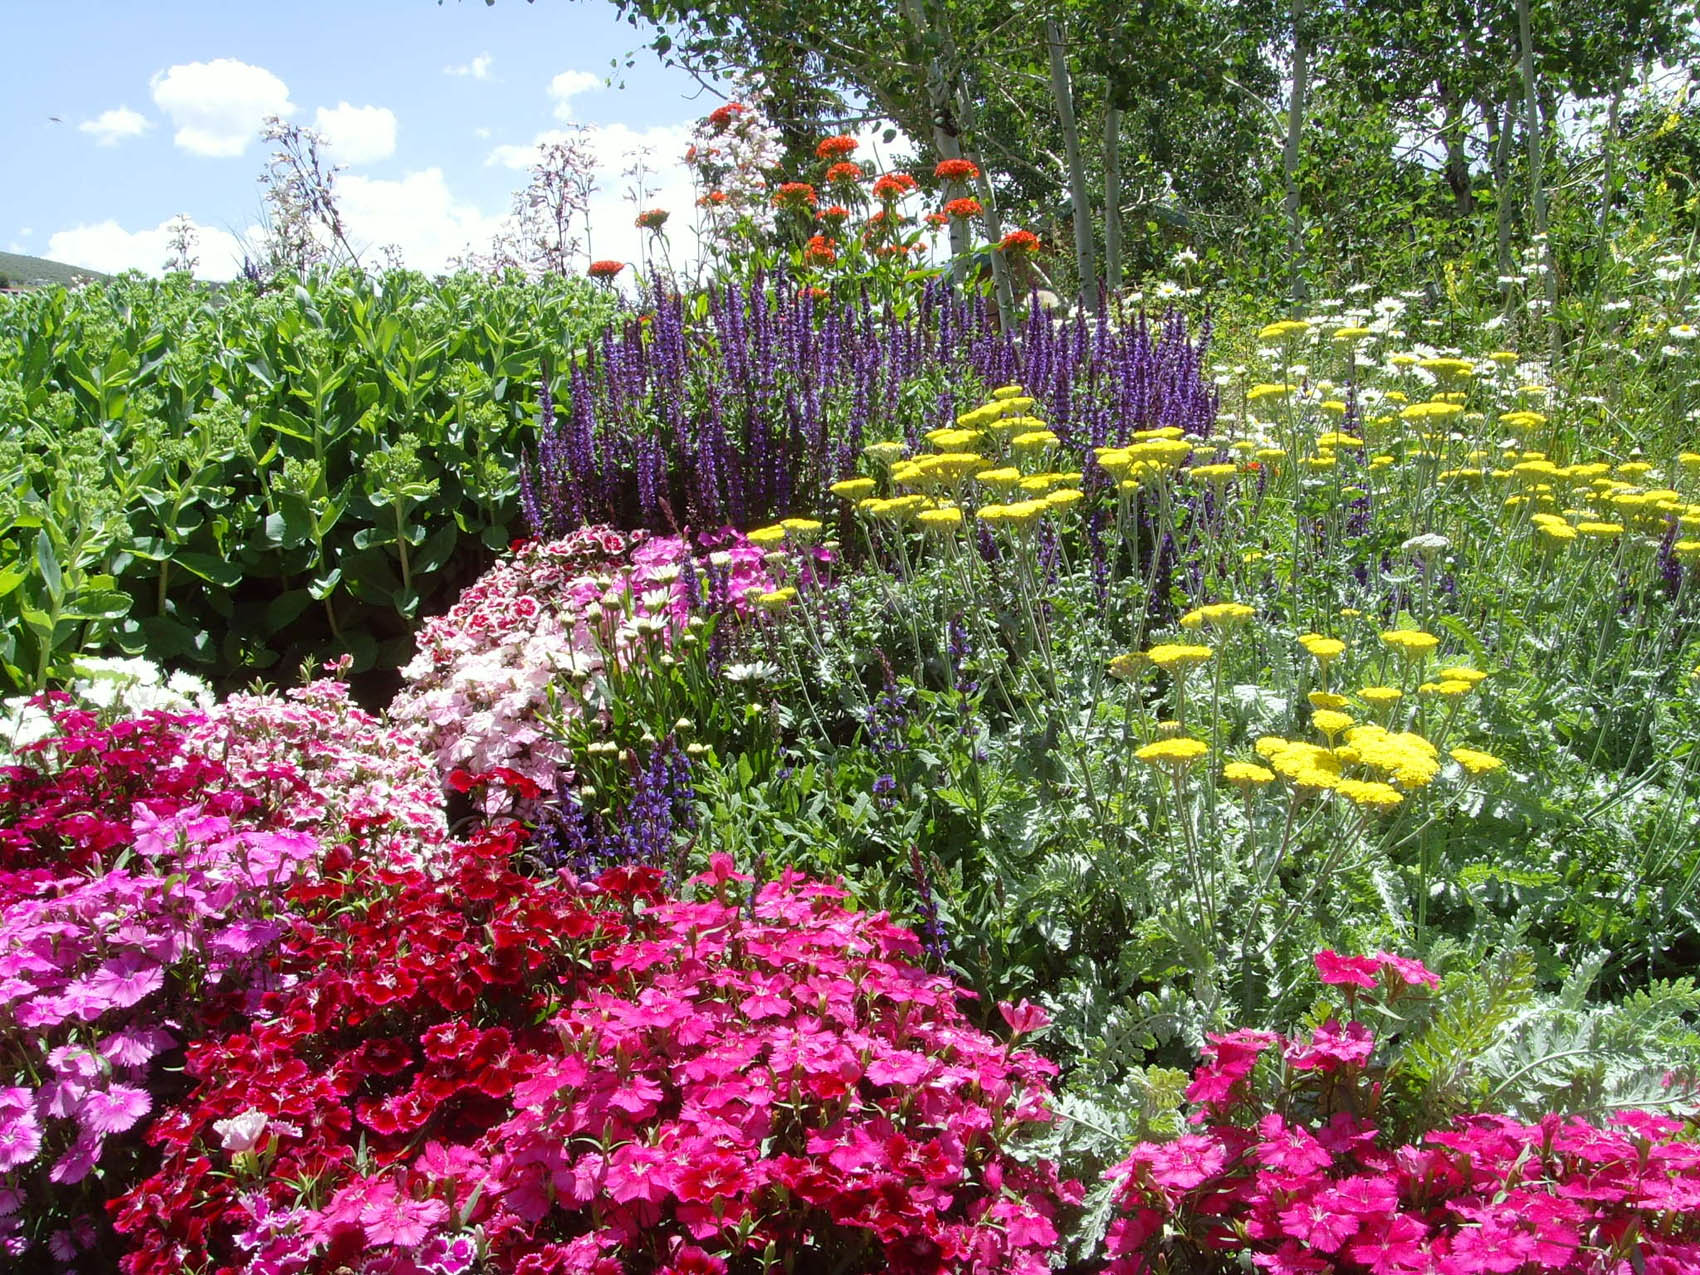 A vibrant garden full of various flowers including red, pink, purple, and yellow blooms, with fresh green foliage under a clear blue sky.